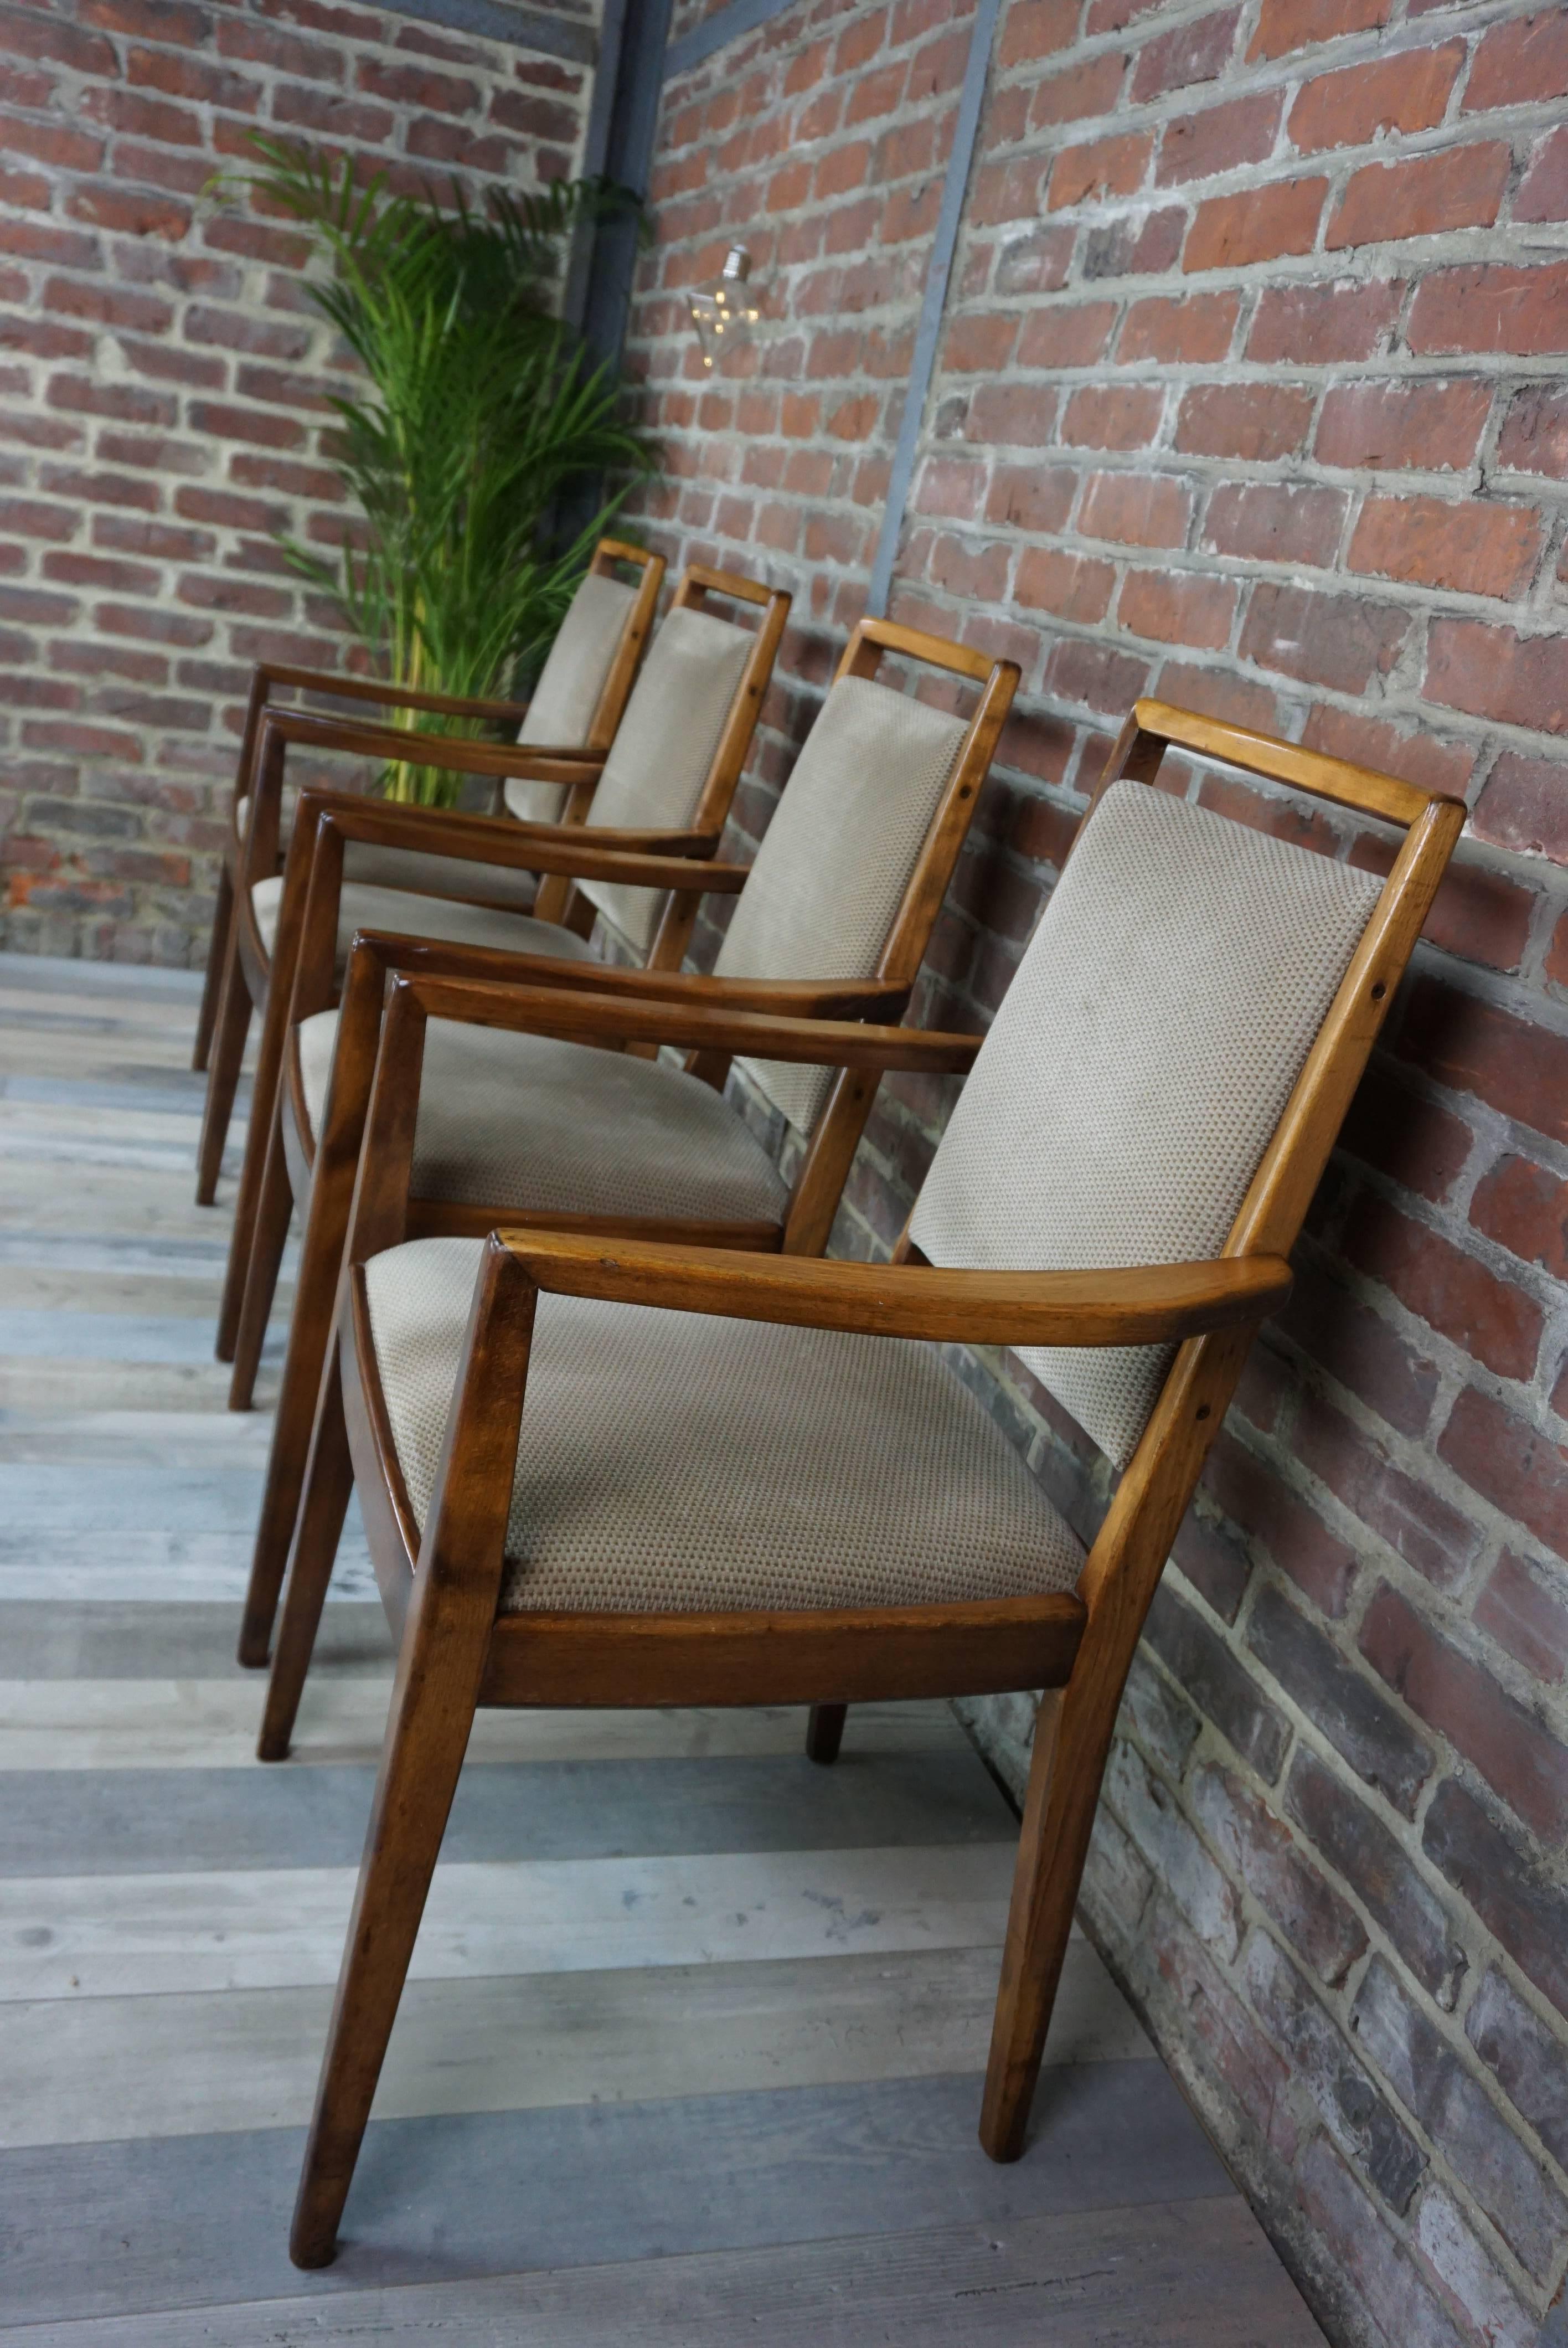 Set of four Scandinavian chairs with armrests, comfortable, elegant. Beautiful workmanship with a nice work of wood, curved at the level of the armrests. Seat and fabric in very good condition.